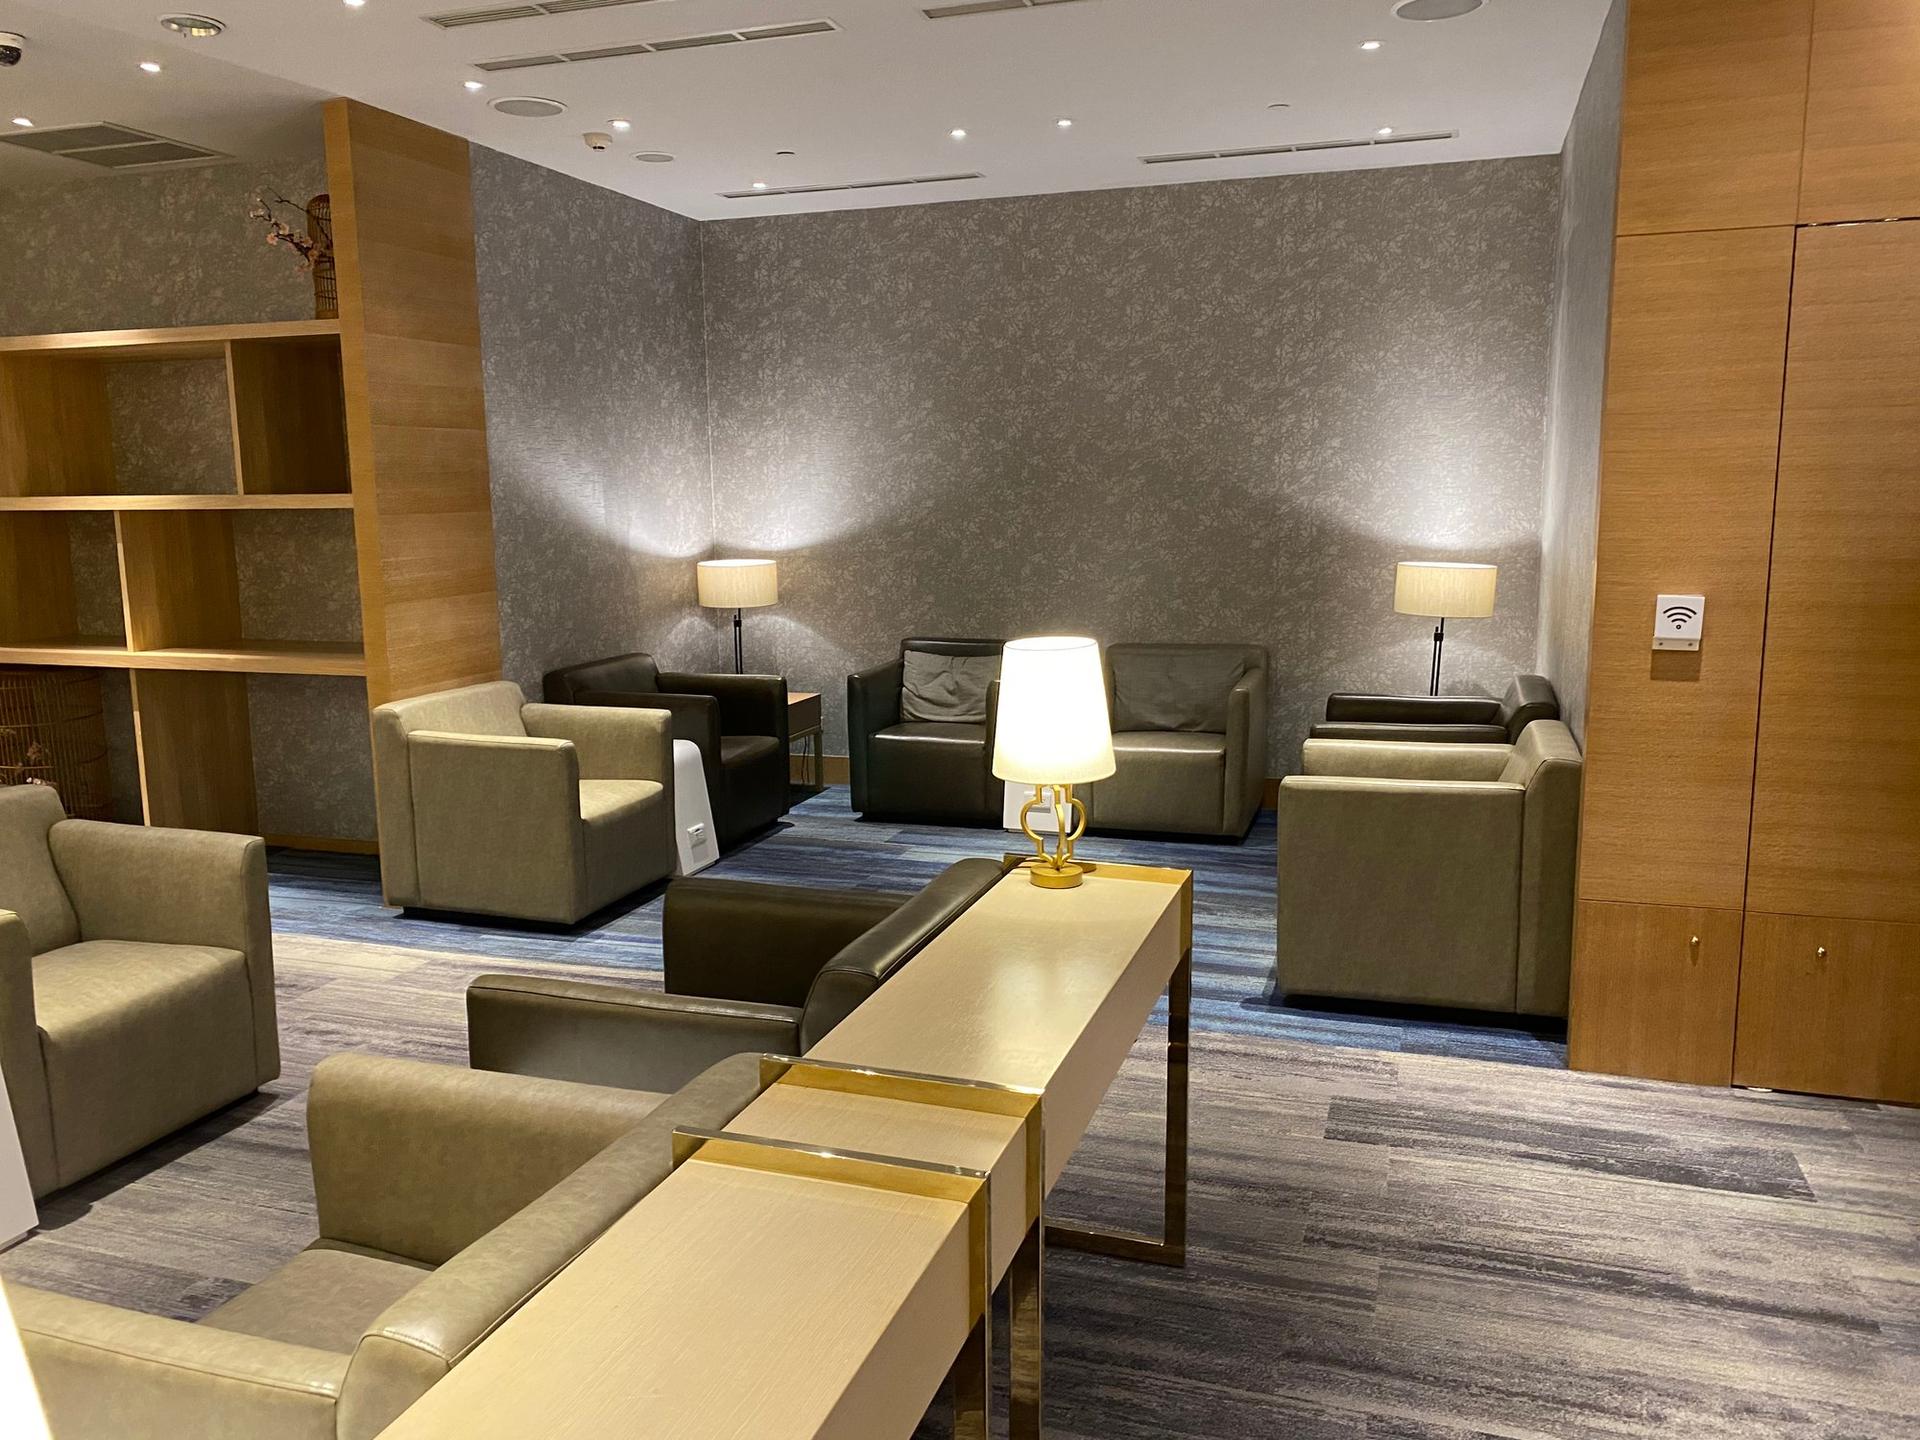 China Airlines Supreme Lounge (V3) image 20 of 21